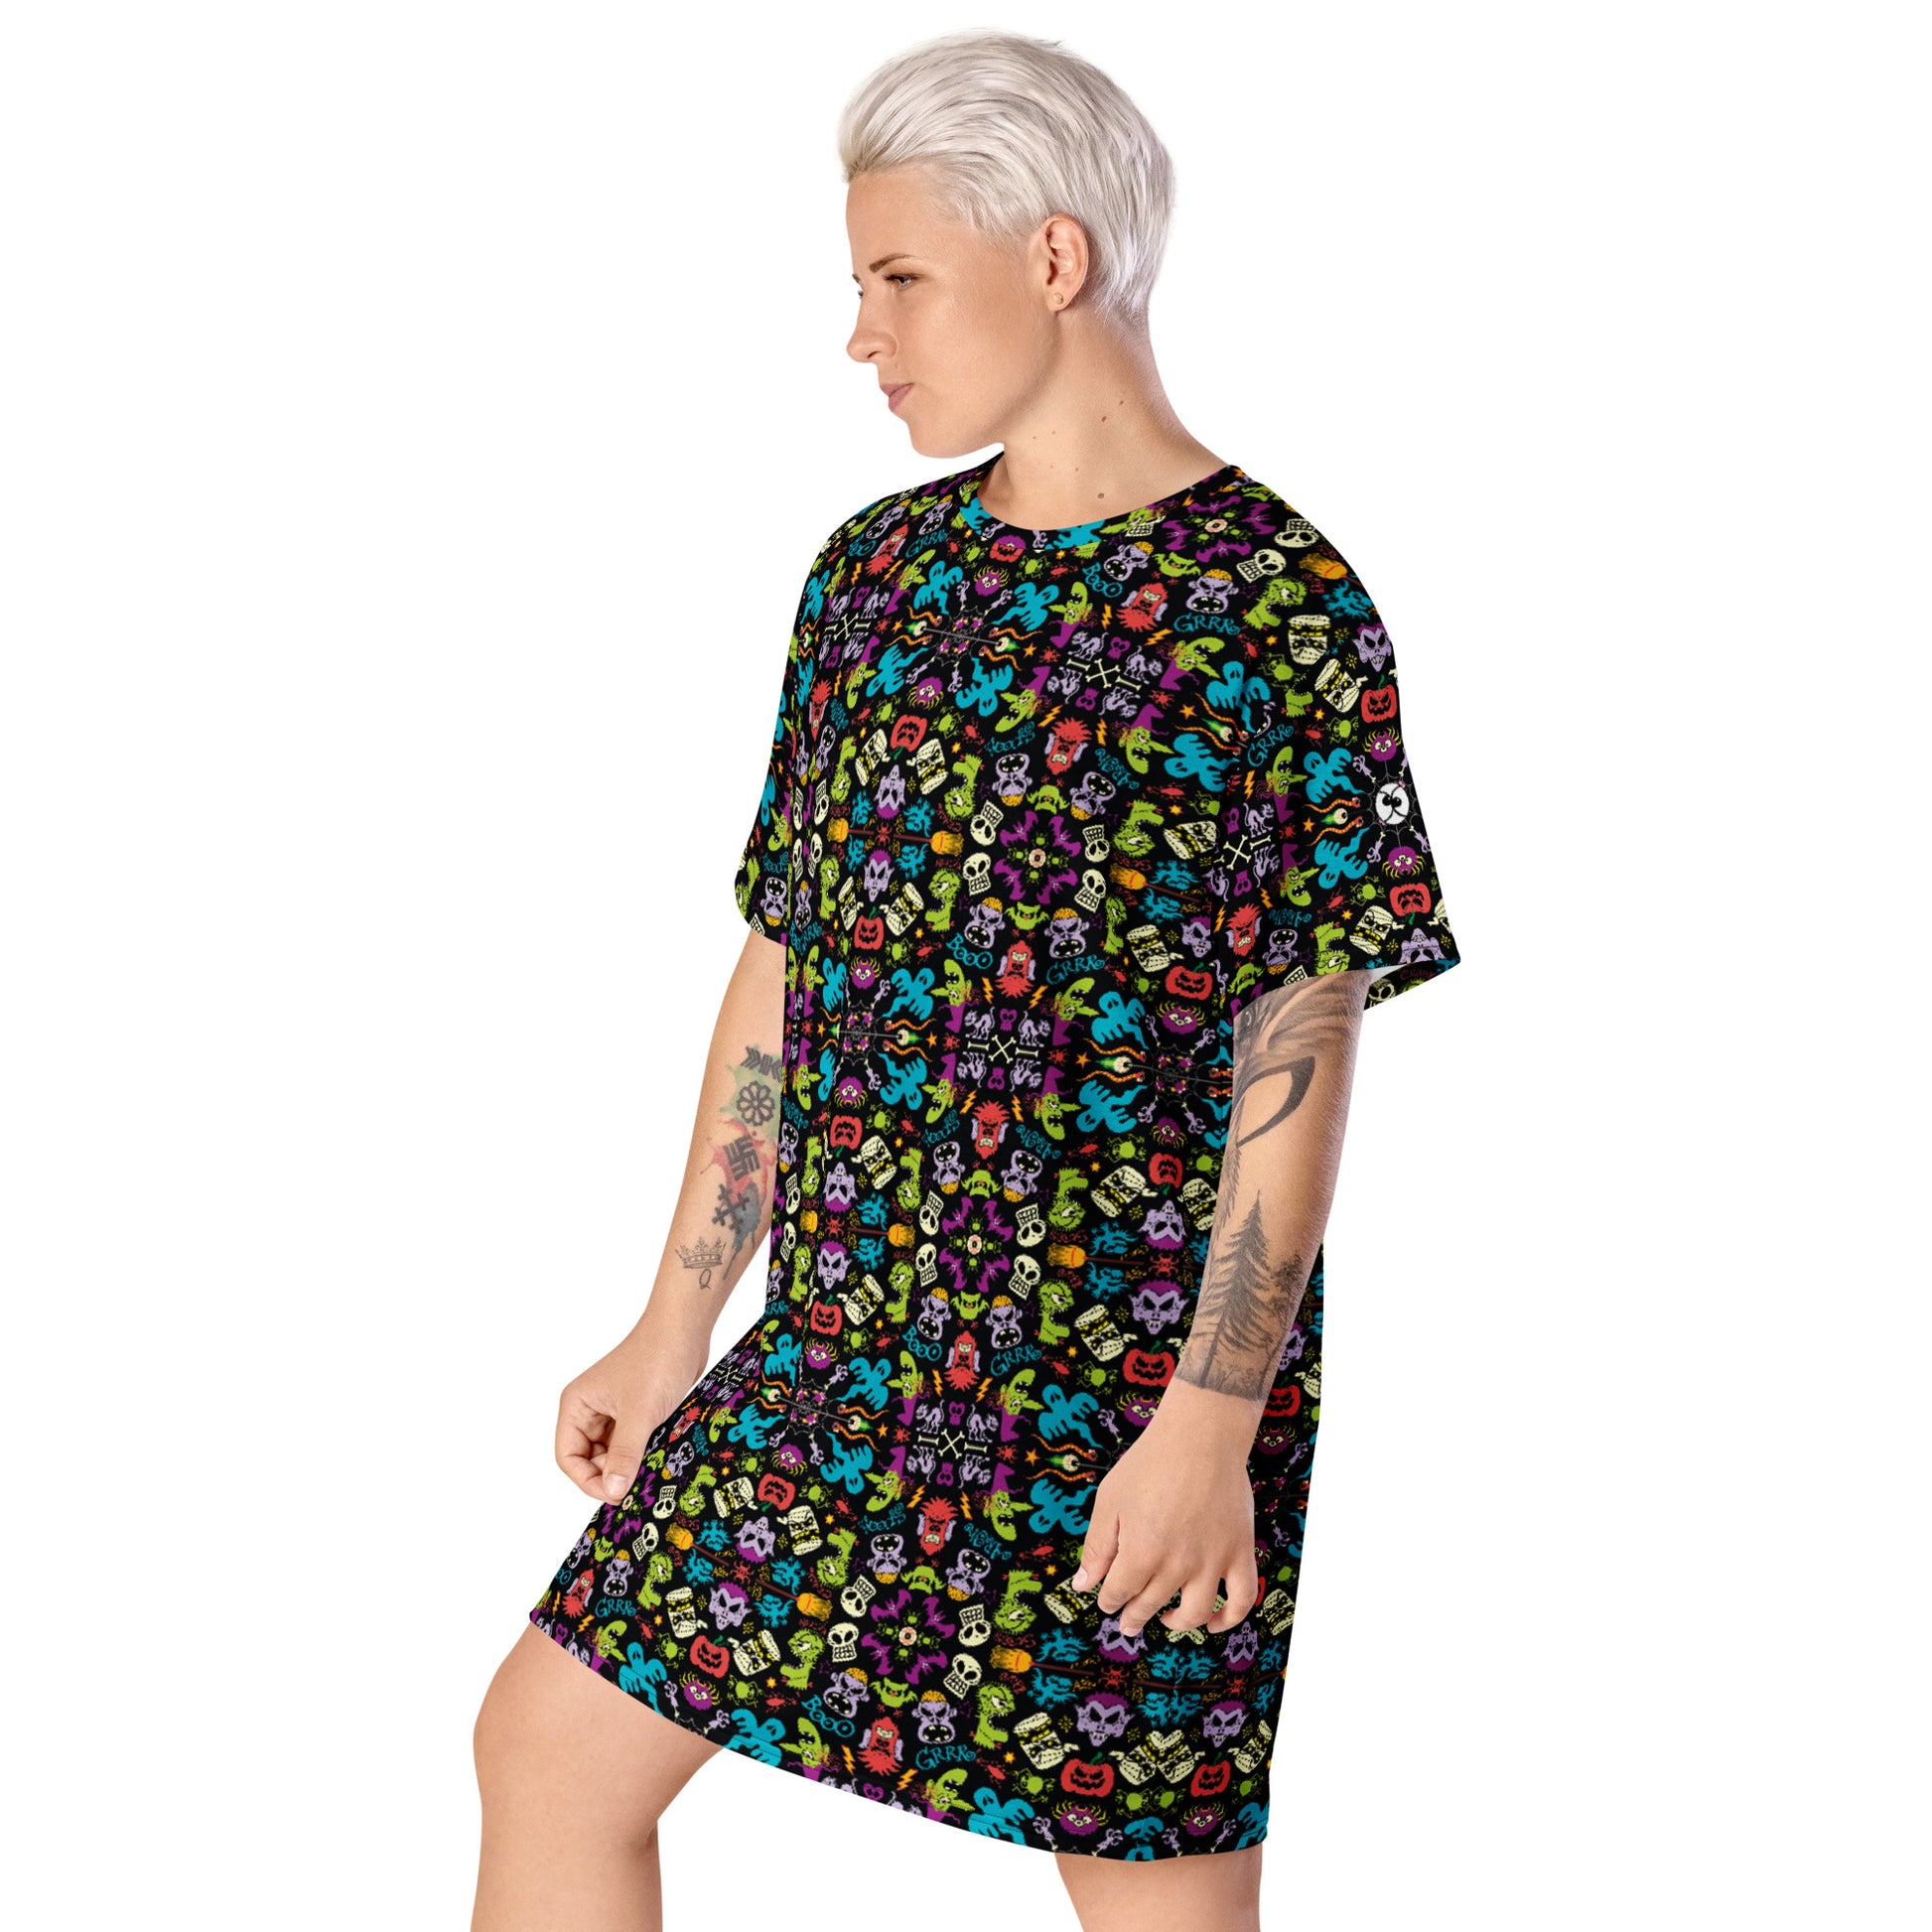 Spooky Halloween characters in a pattern design T-shirt dress. Side view